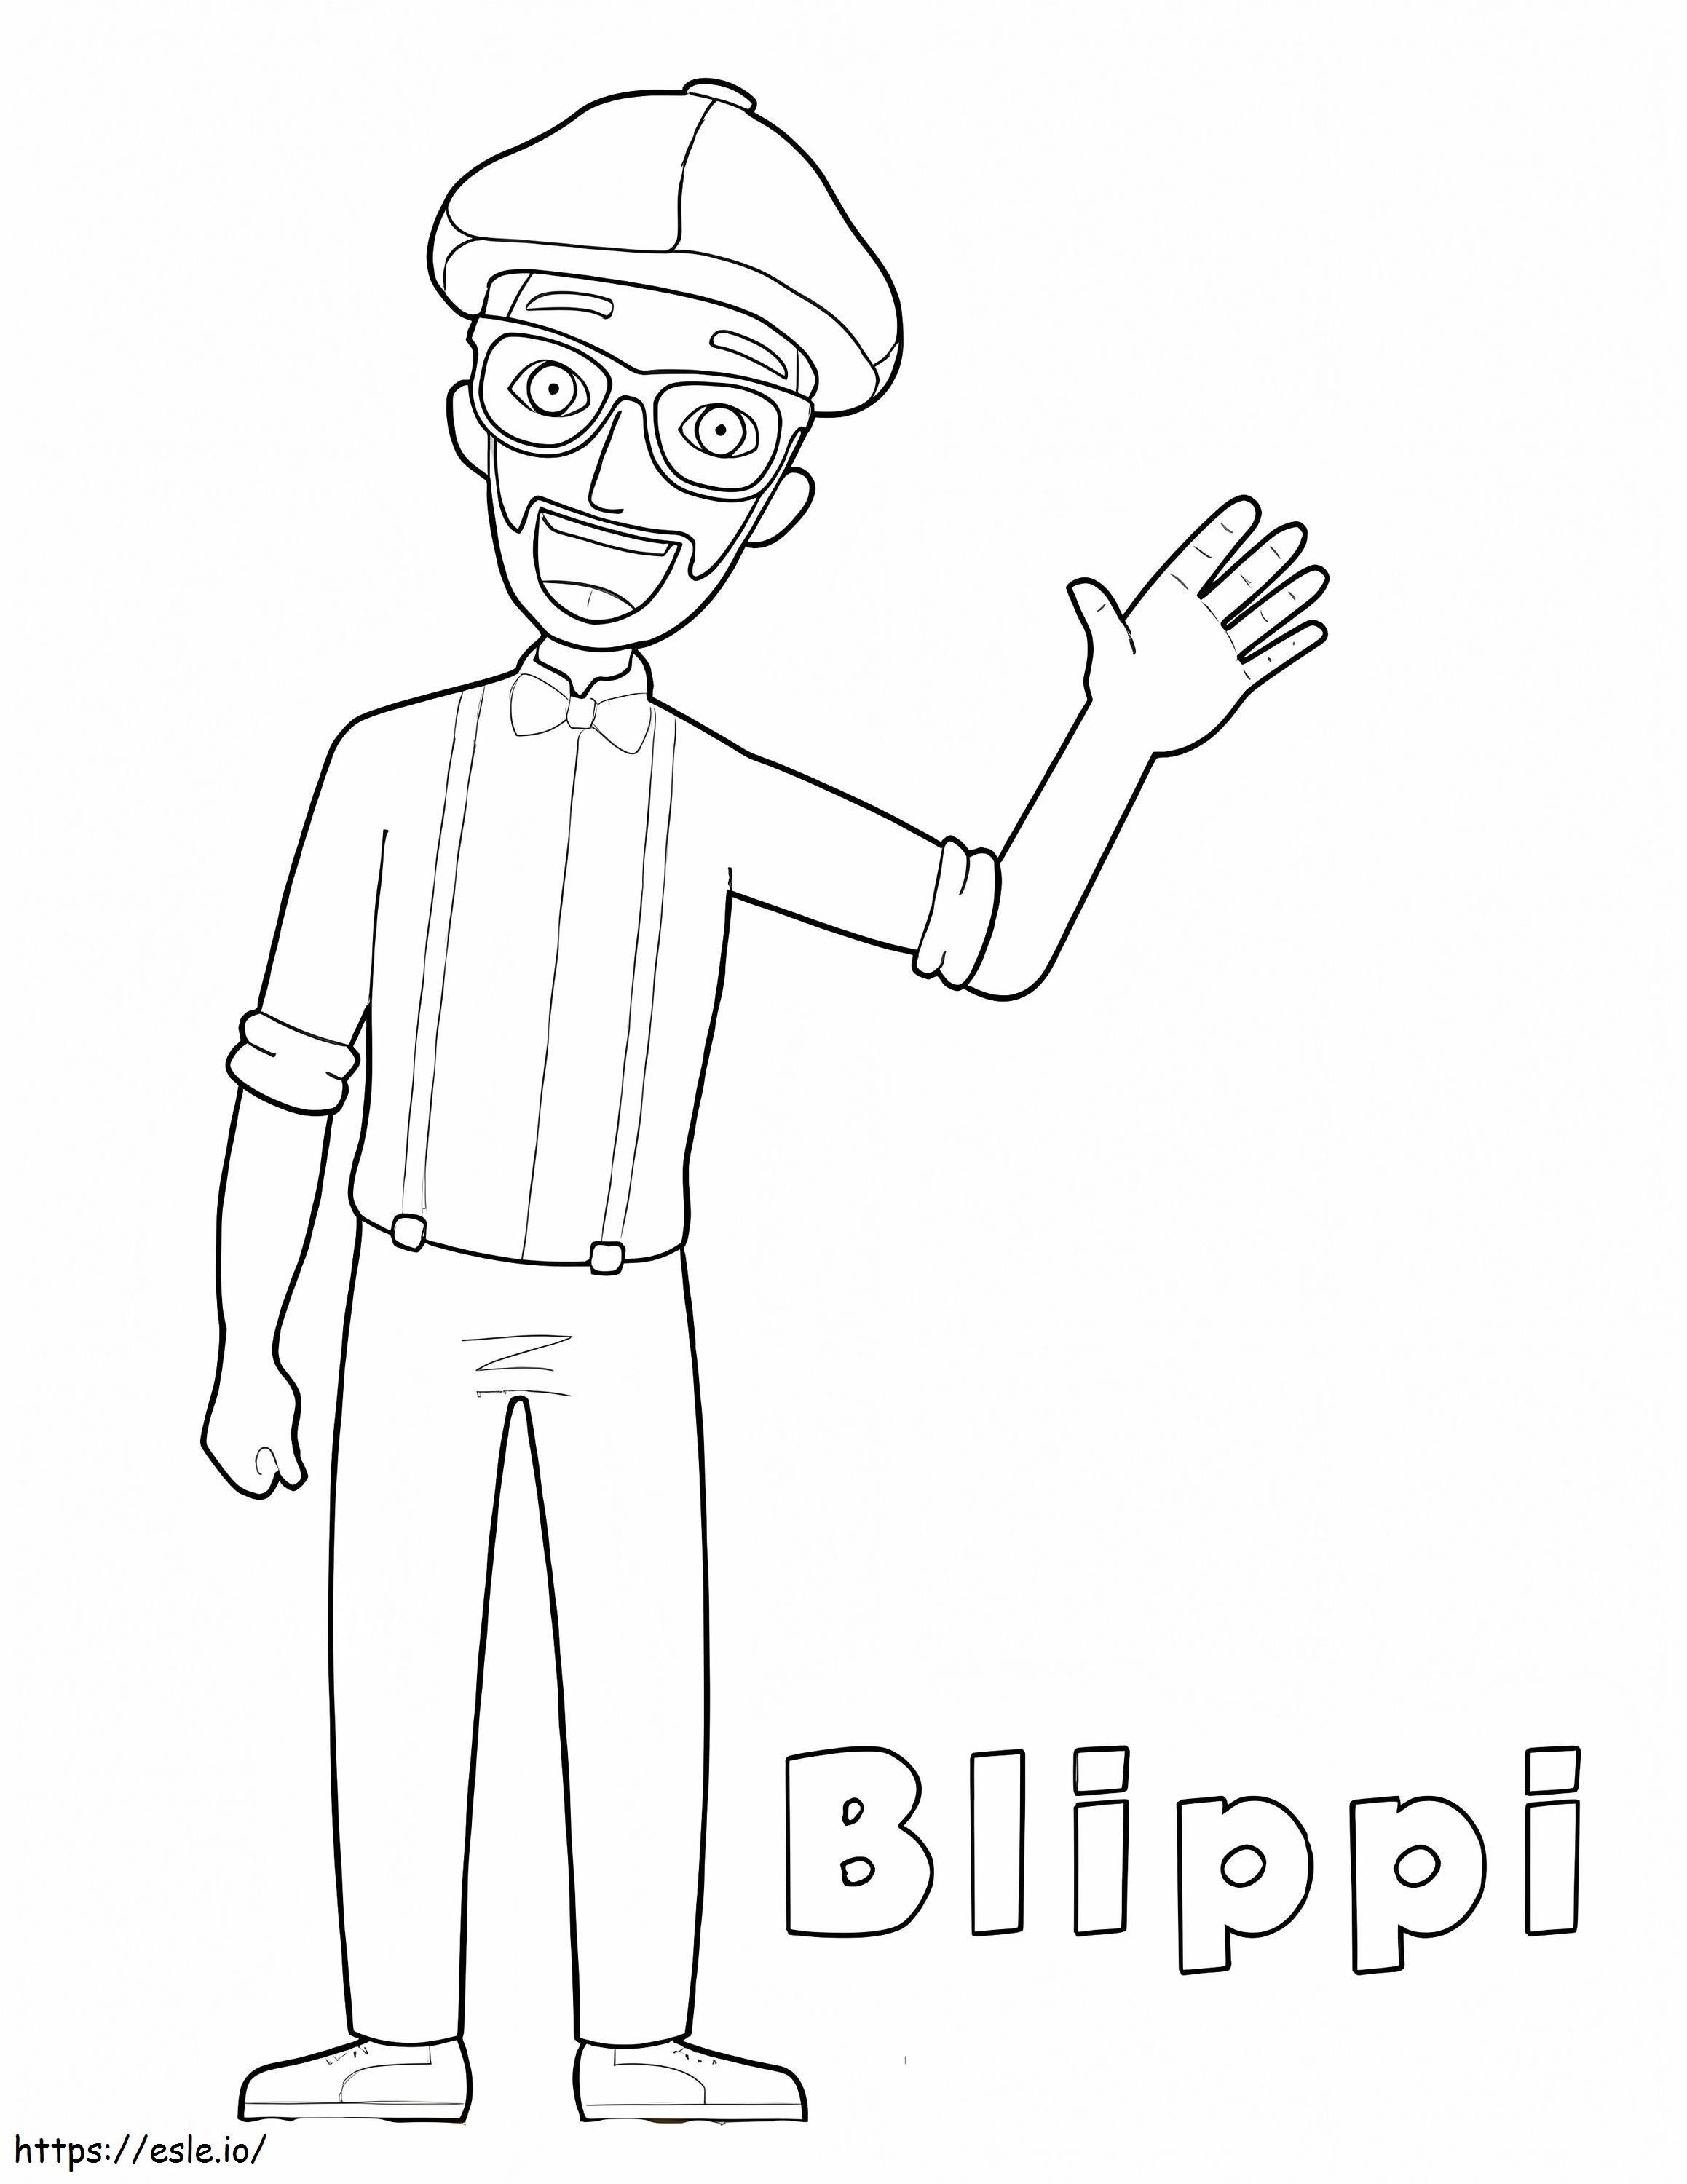 Blip coloring page